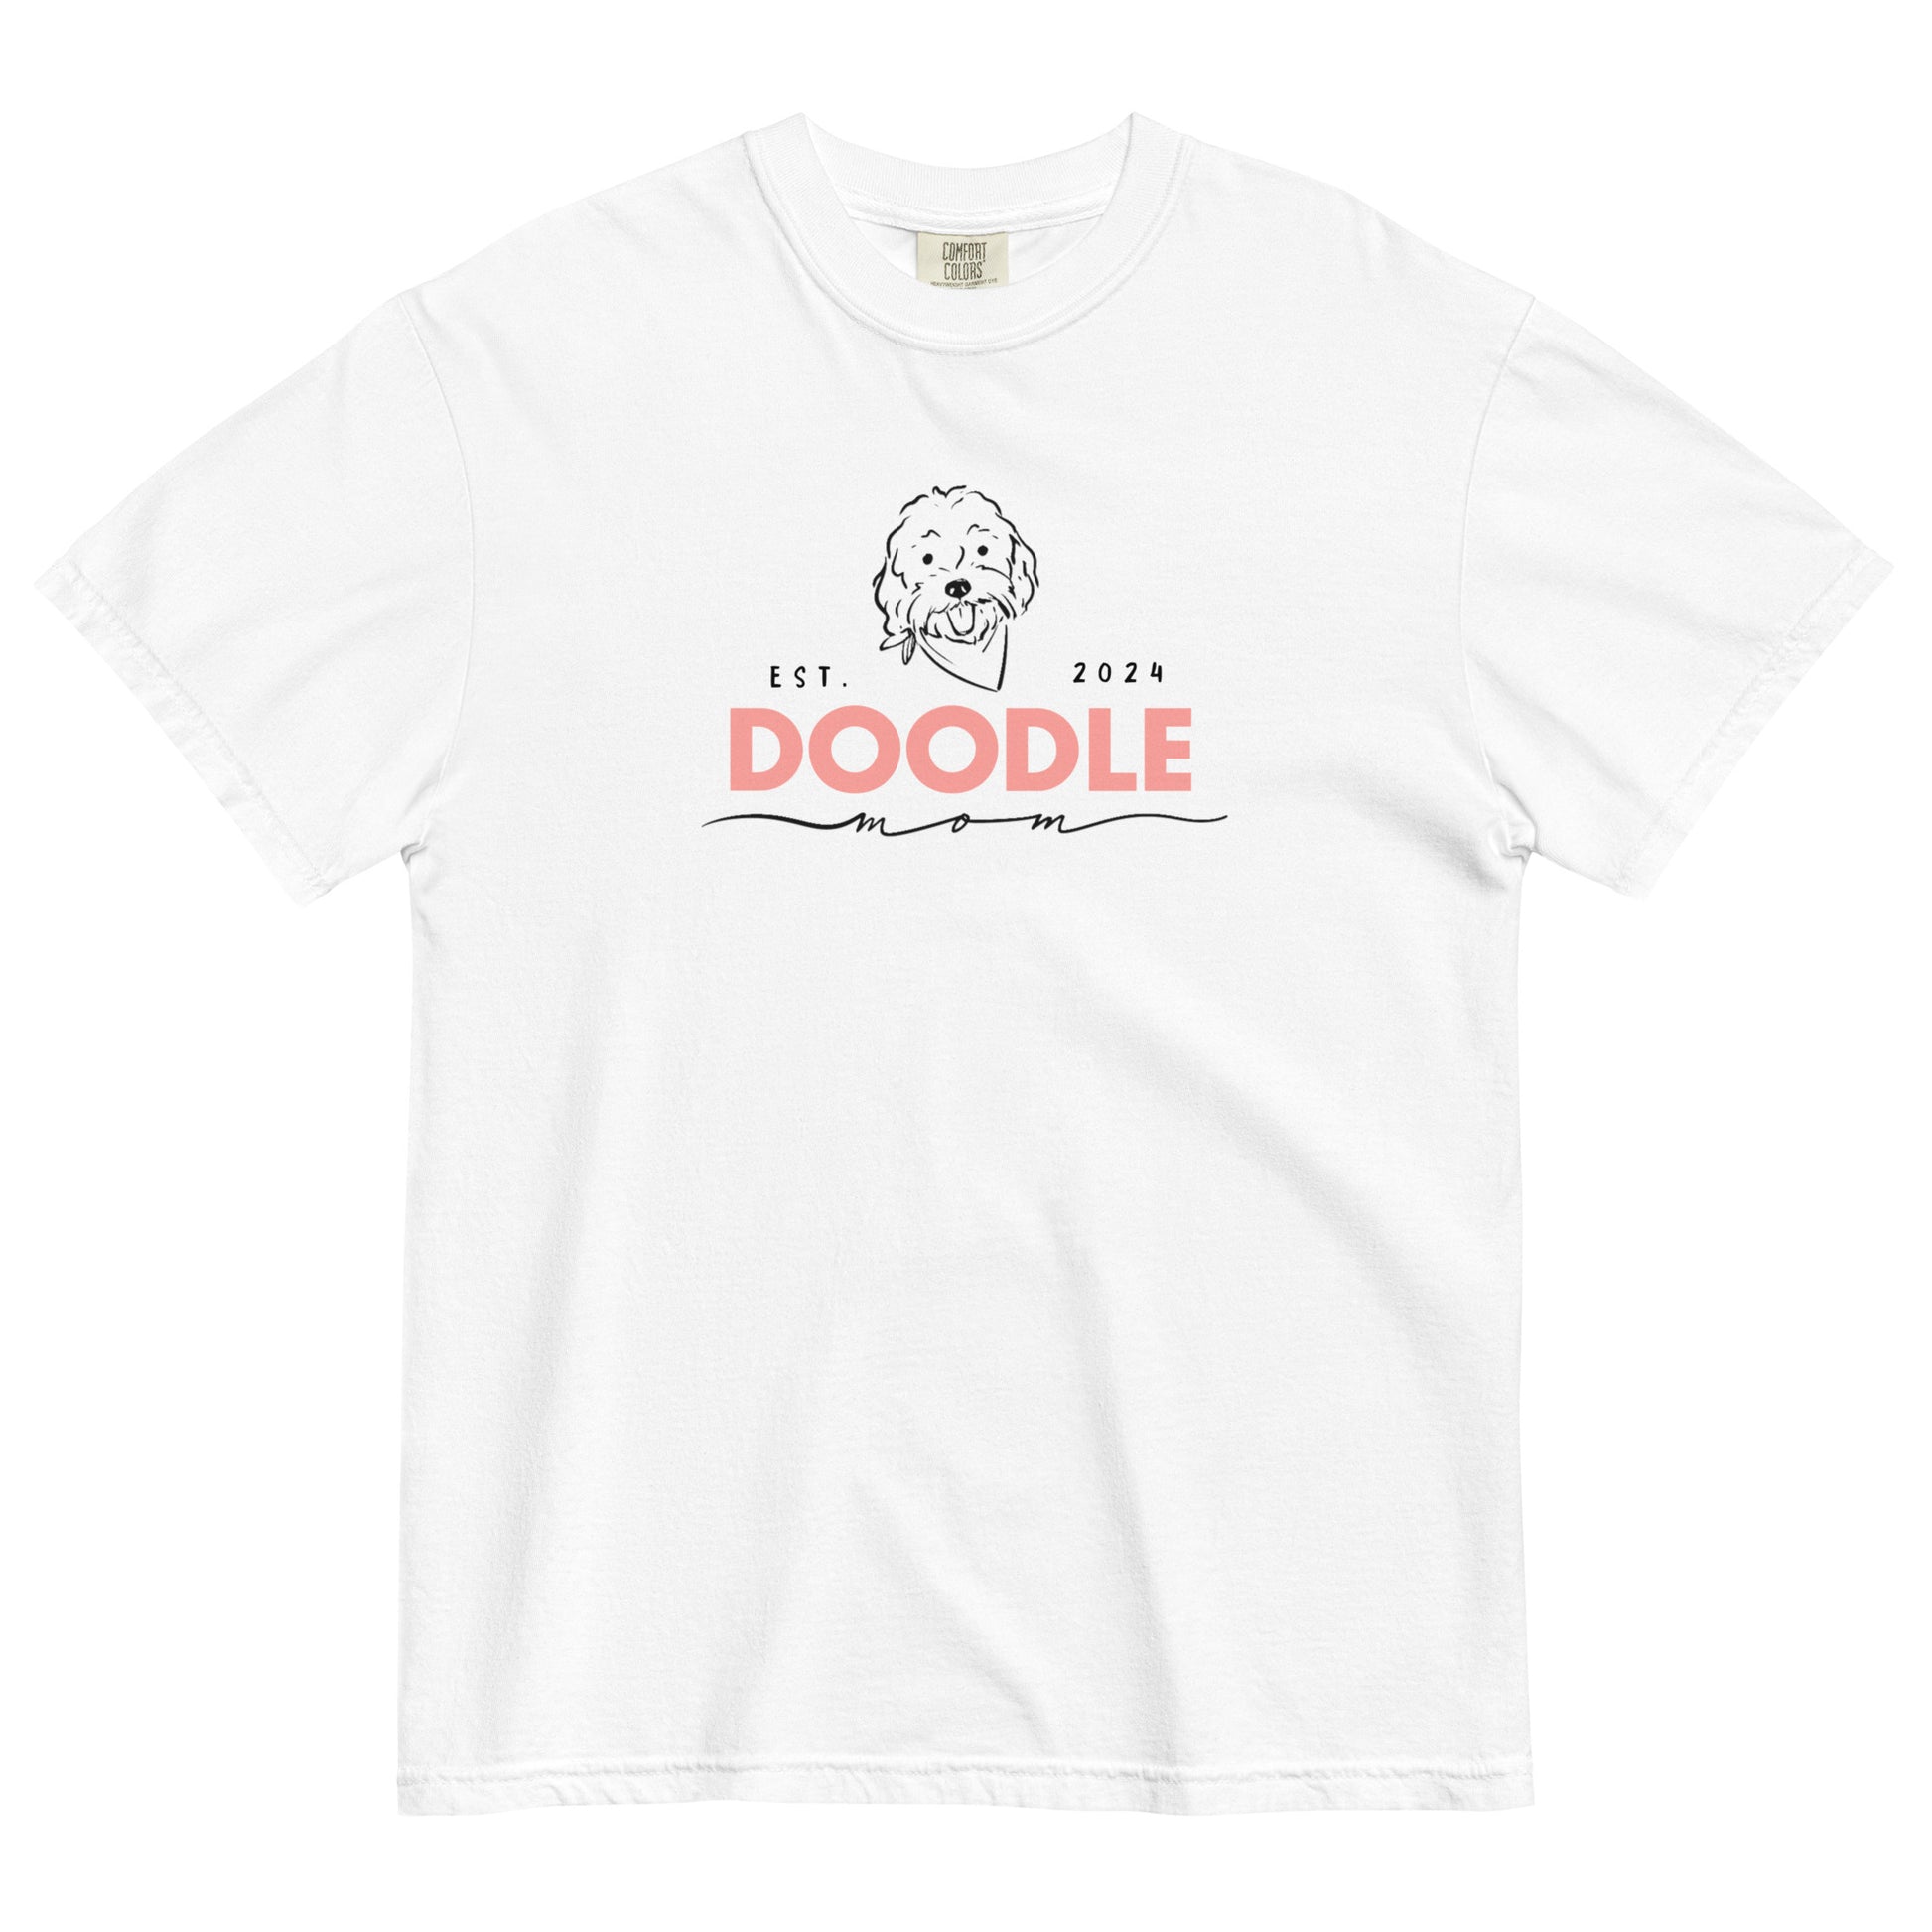 This white Doodle Mom T-shirt displays the message, "Doodle Mom Est. 2024" and a cute Goldendoodle dog's face printed on the front of a cozy T-Shirt. The tag inside the Doodle Mom shirt says Comfort Colors